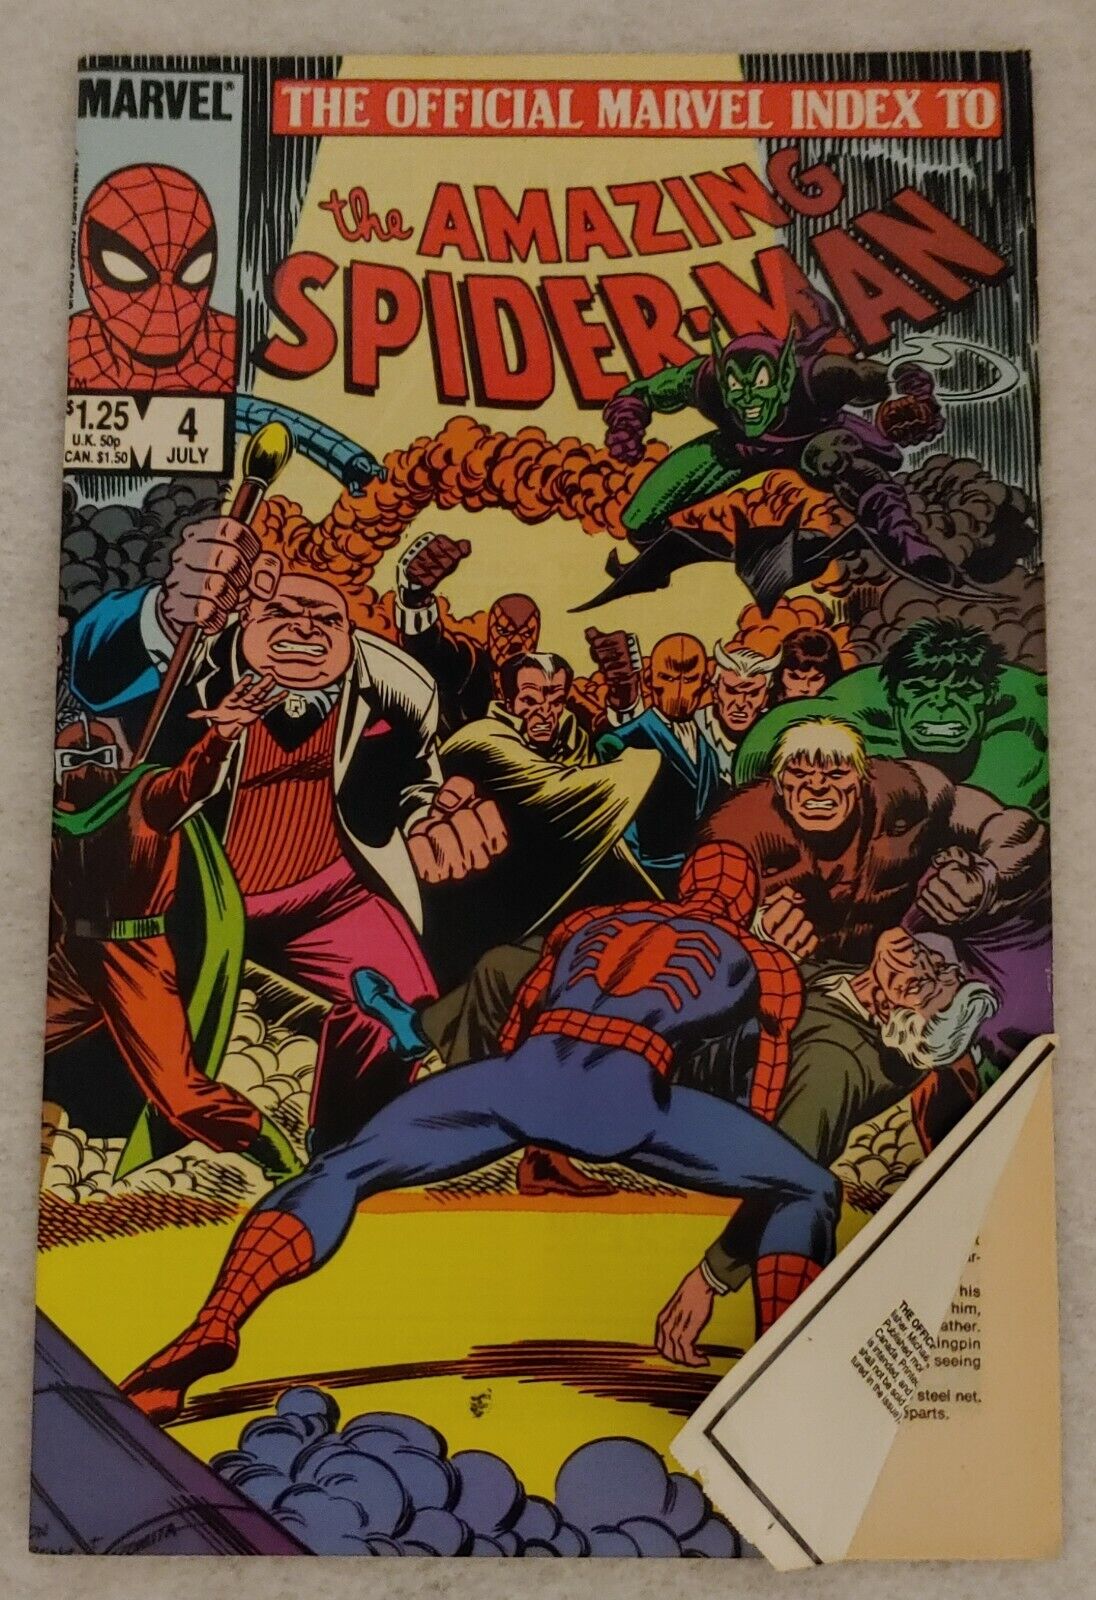 VERY RARE FRONT PAGE MISCUT Marvel Comic The Amazing Spider-Man, July 1985, No.4